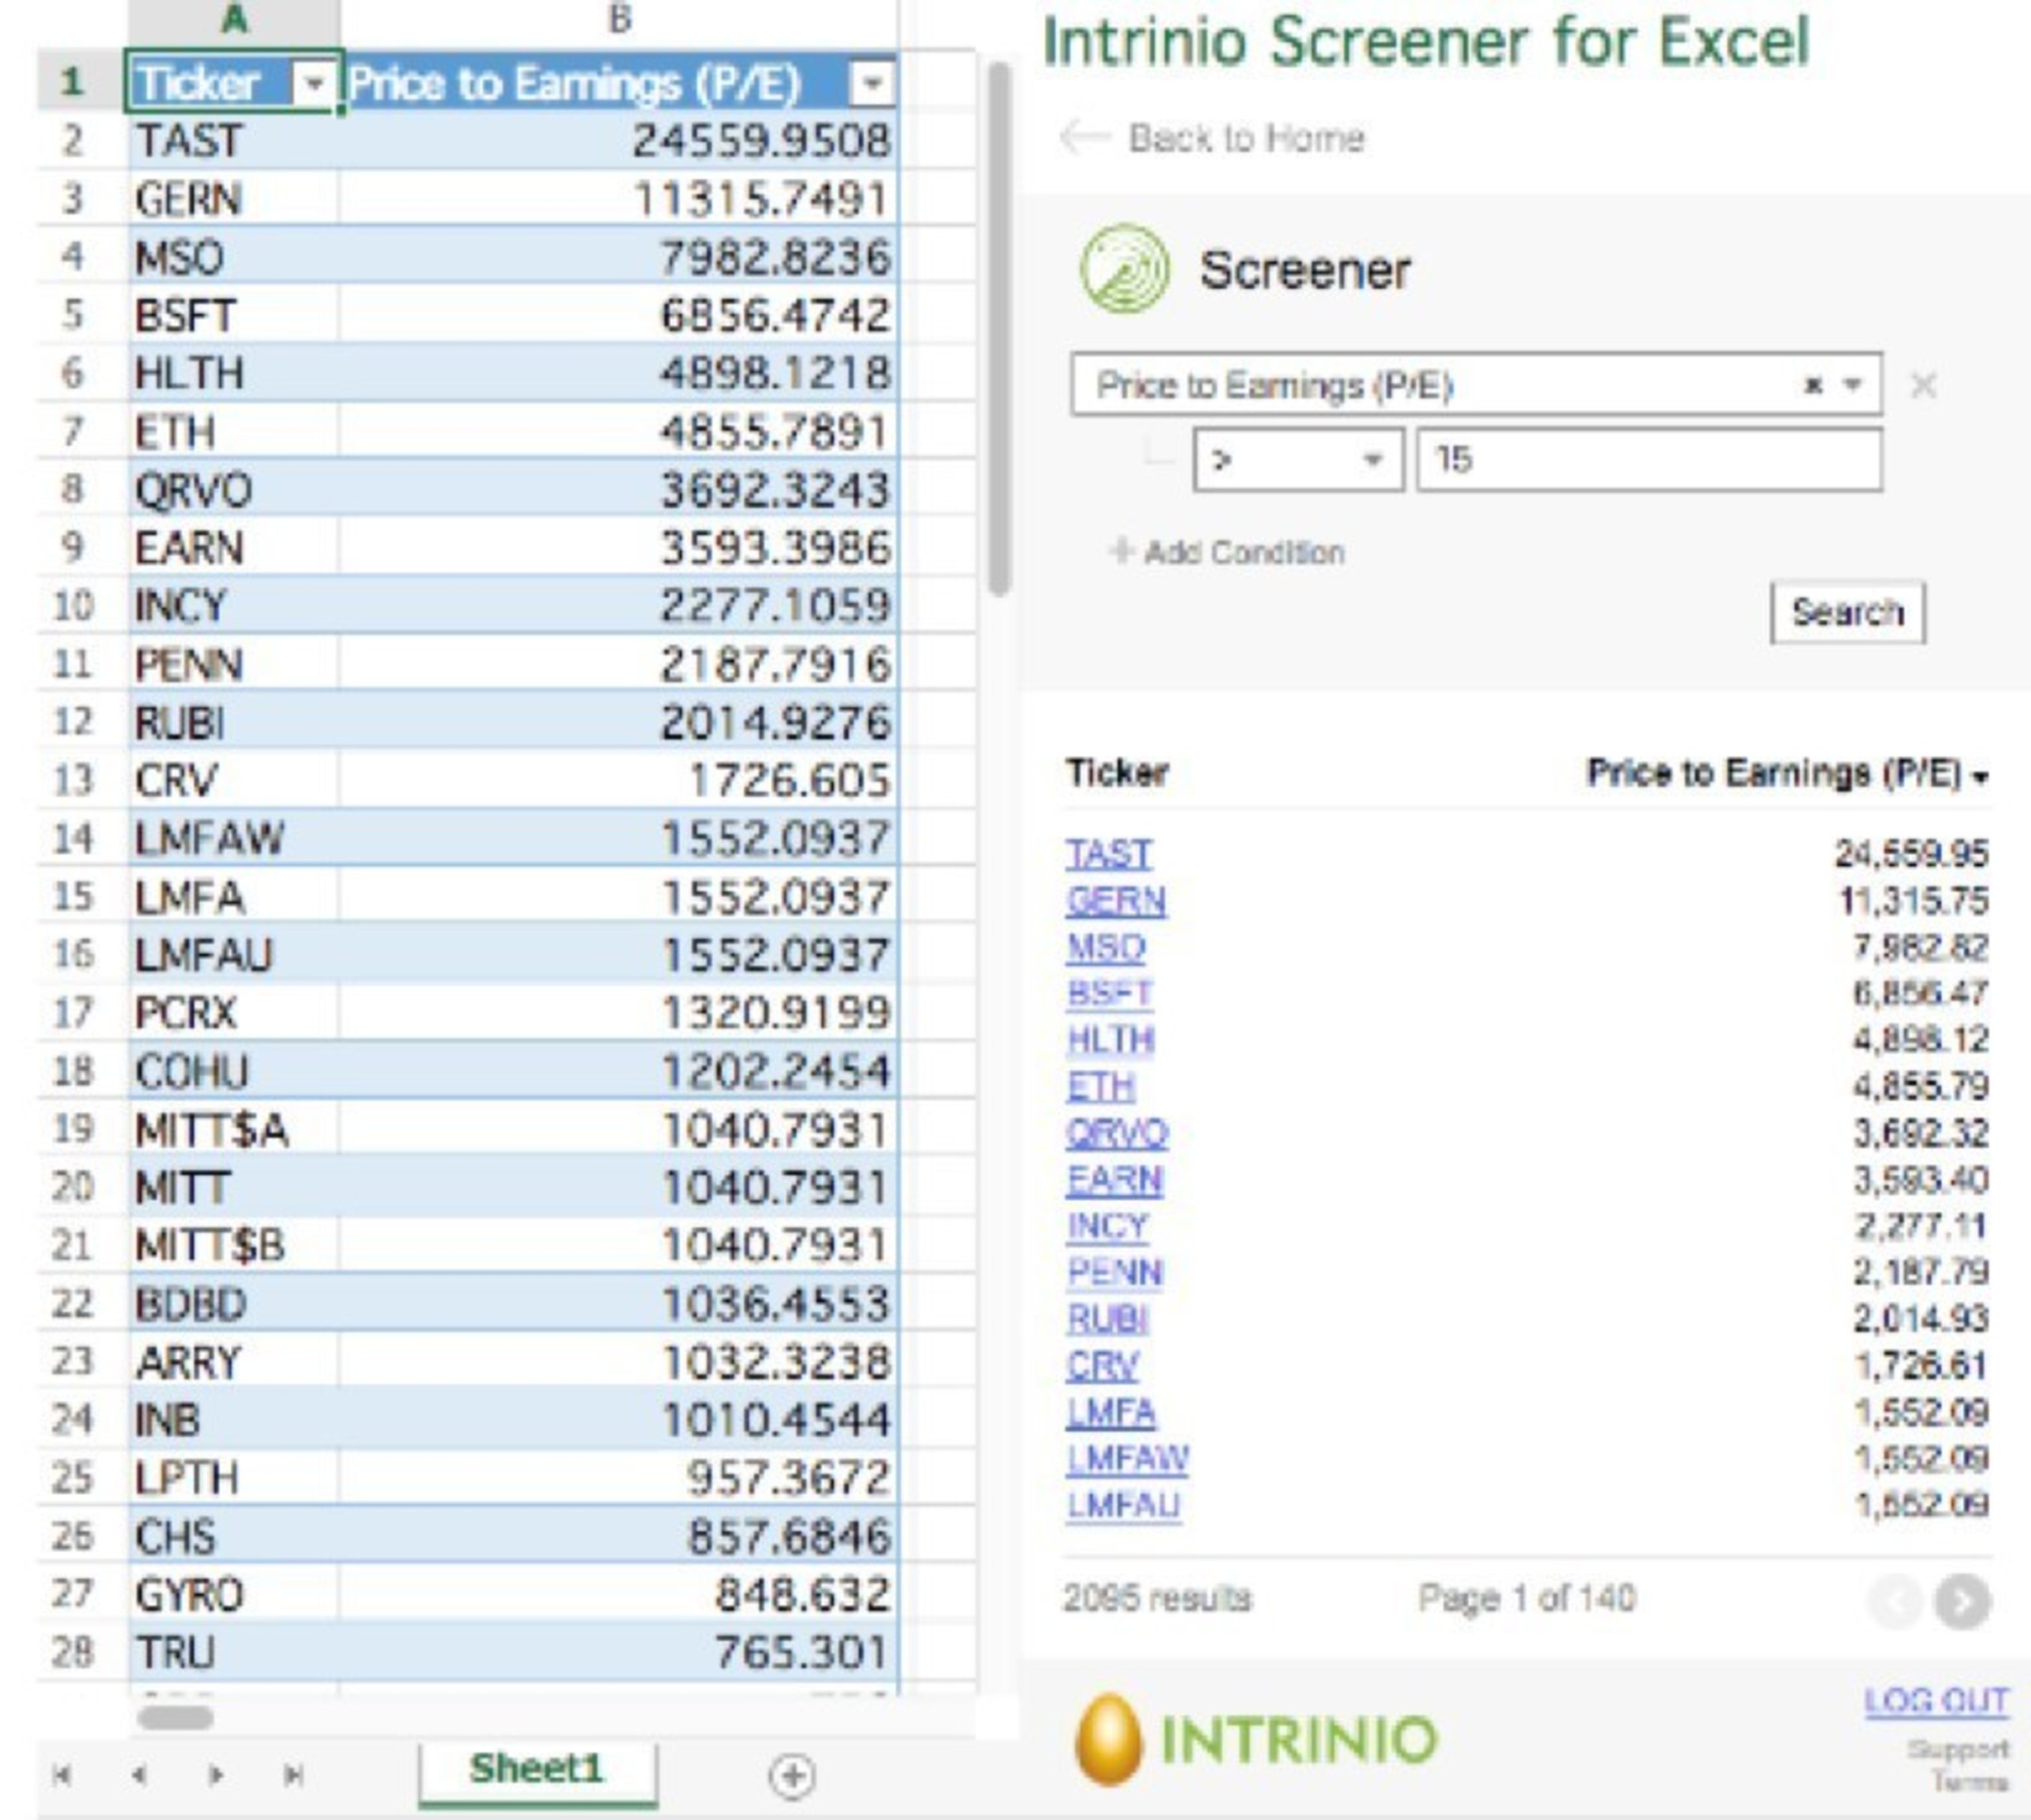 Intrinio Screener for Excel - Screen on Over 500 Parameters